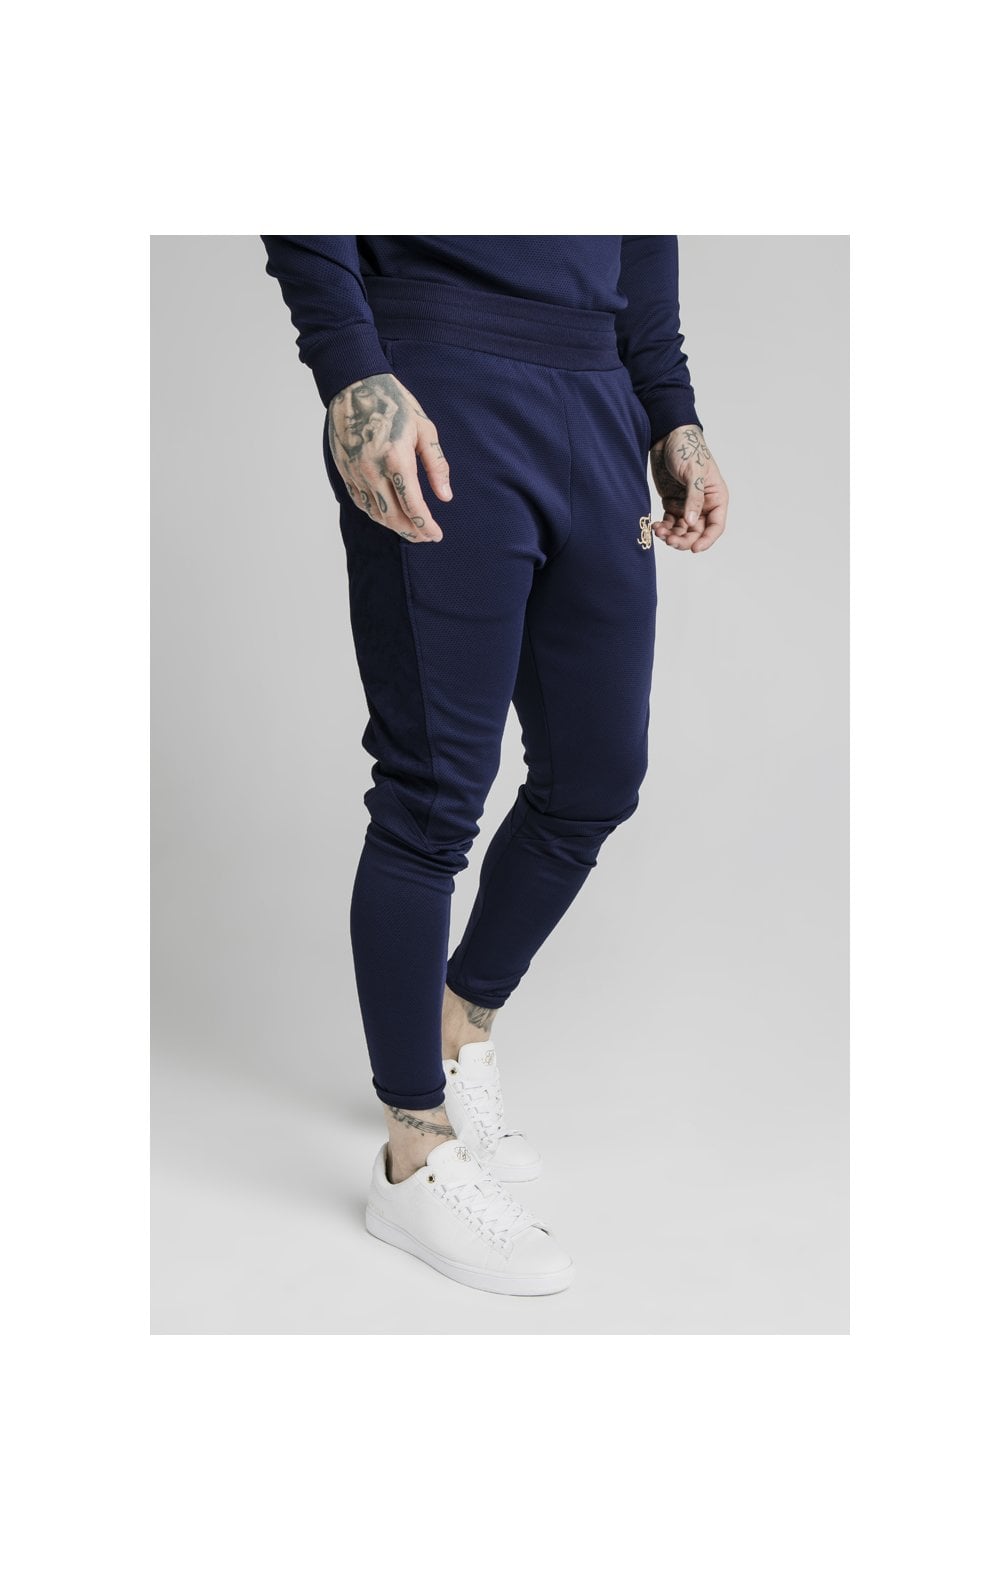 SikSilk Fitted Panel Cuff Pants - Navy Eclipse (2)